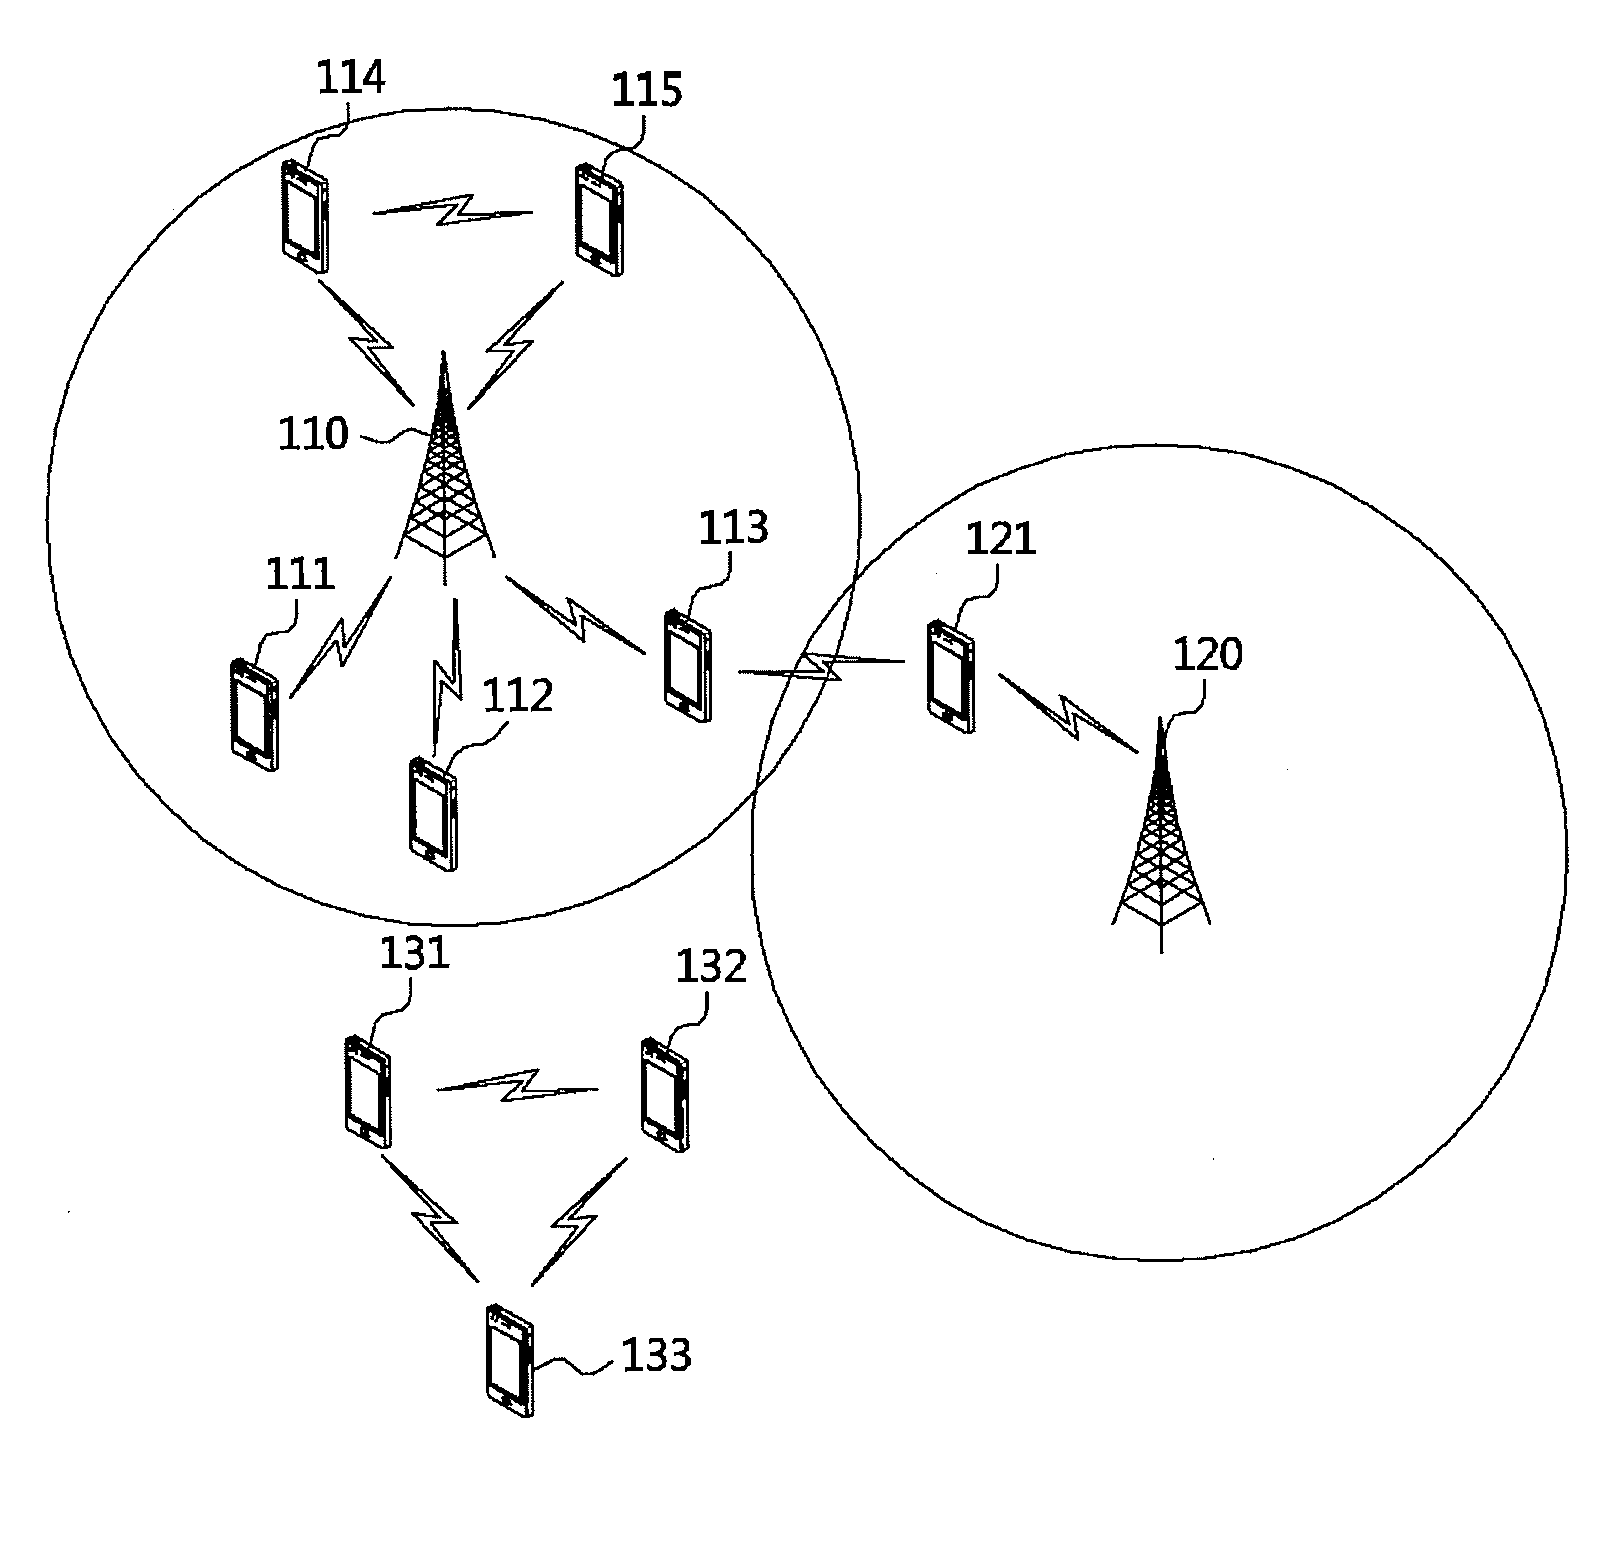 Method for peer discovery using device-to-device link